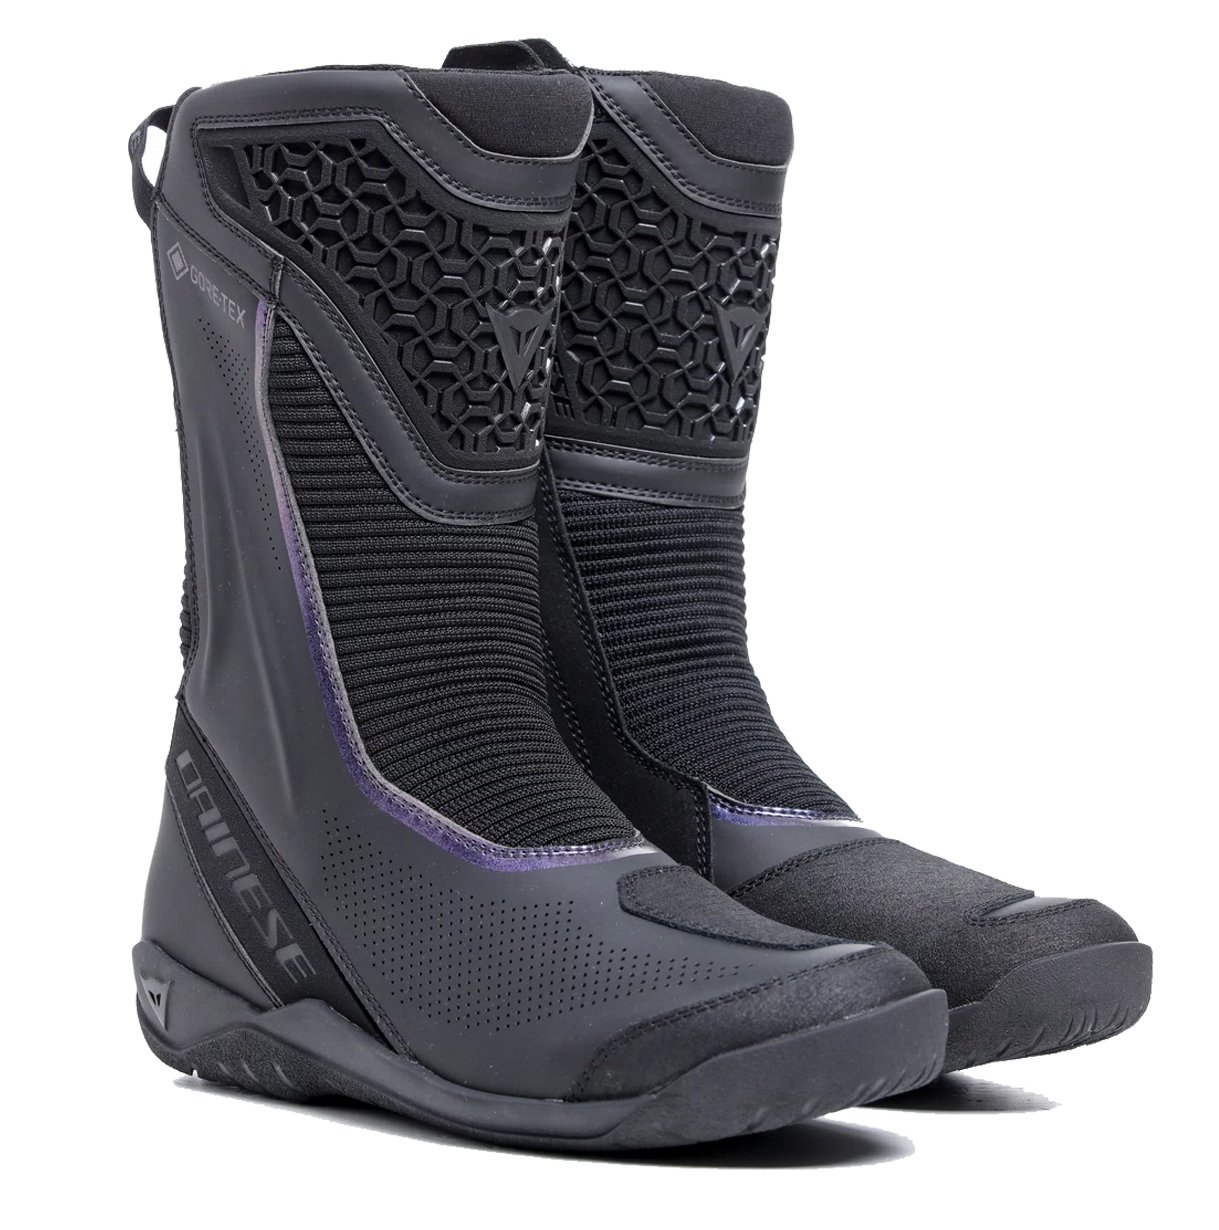 Image of Dainese Freeland 2 Gore-Tex Boots Wmn Black Size 37 ID 8051019693105